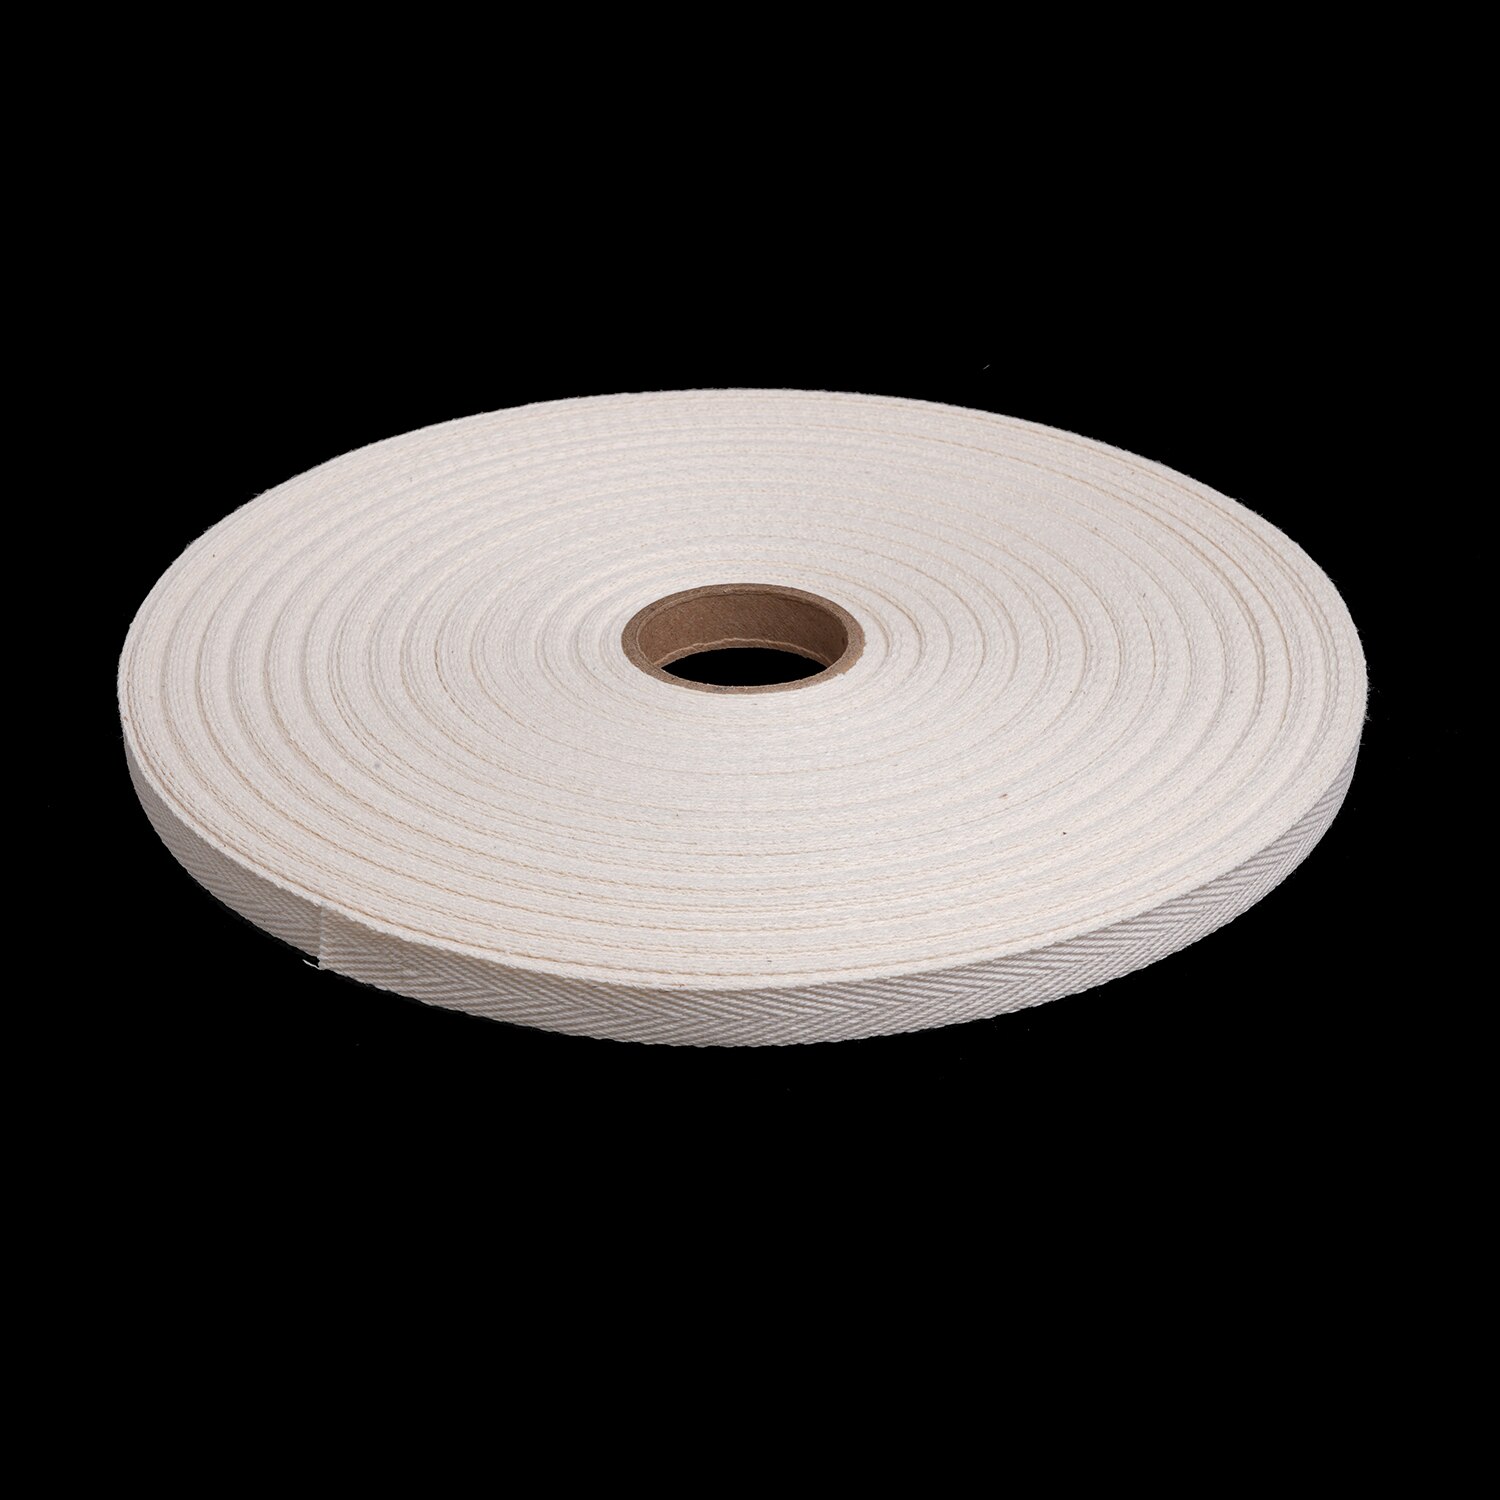 1 6428-17 .007 Woven Cotton Tape (Lightweight) 105°C, natural, 1 wide x  36 YD roll